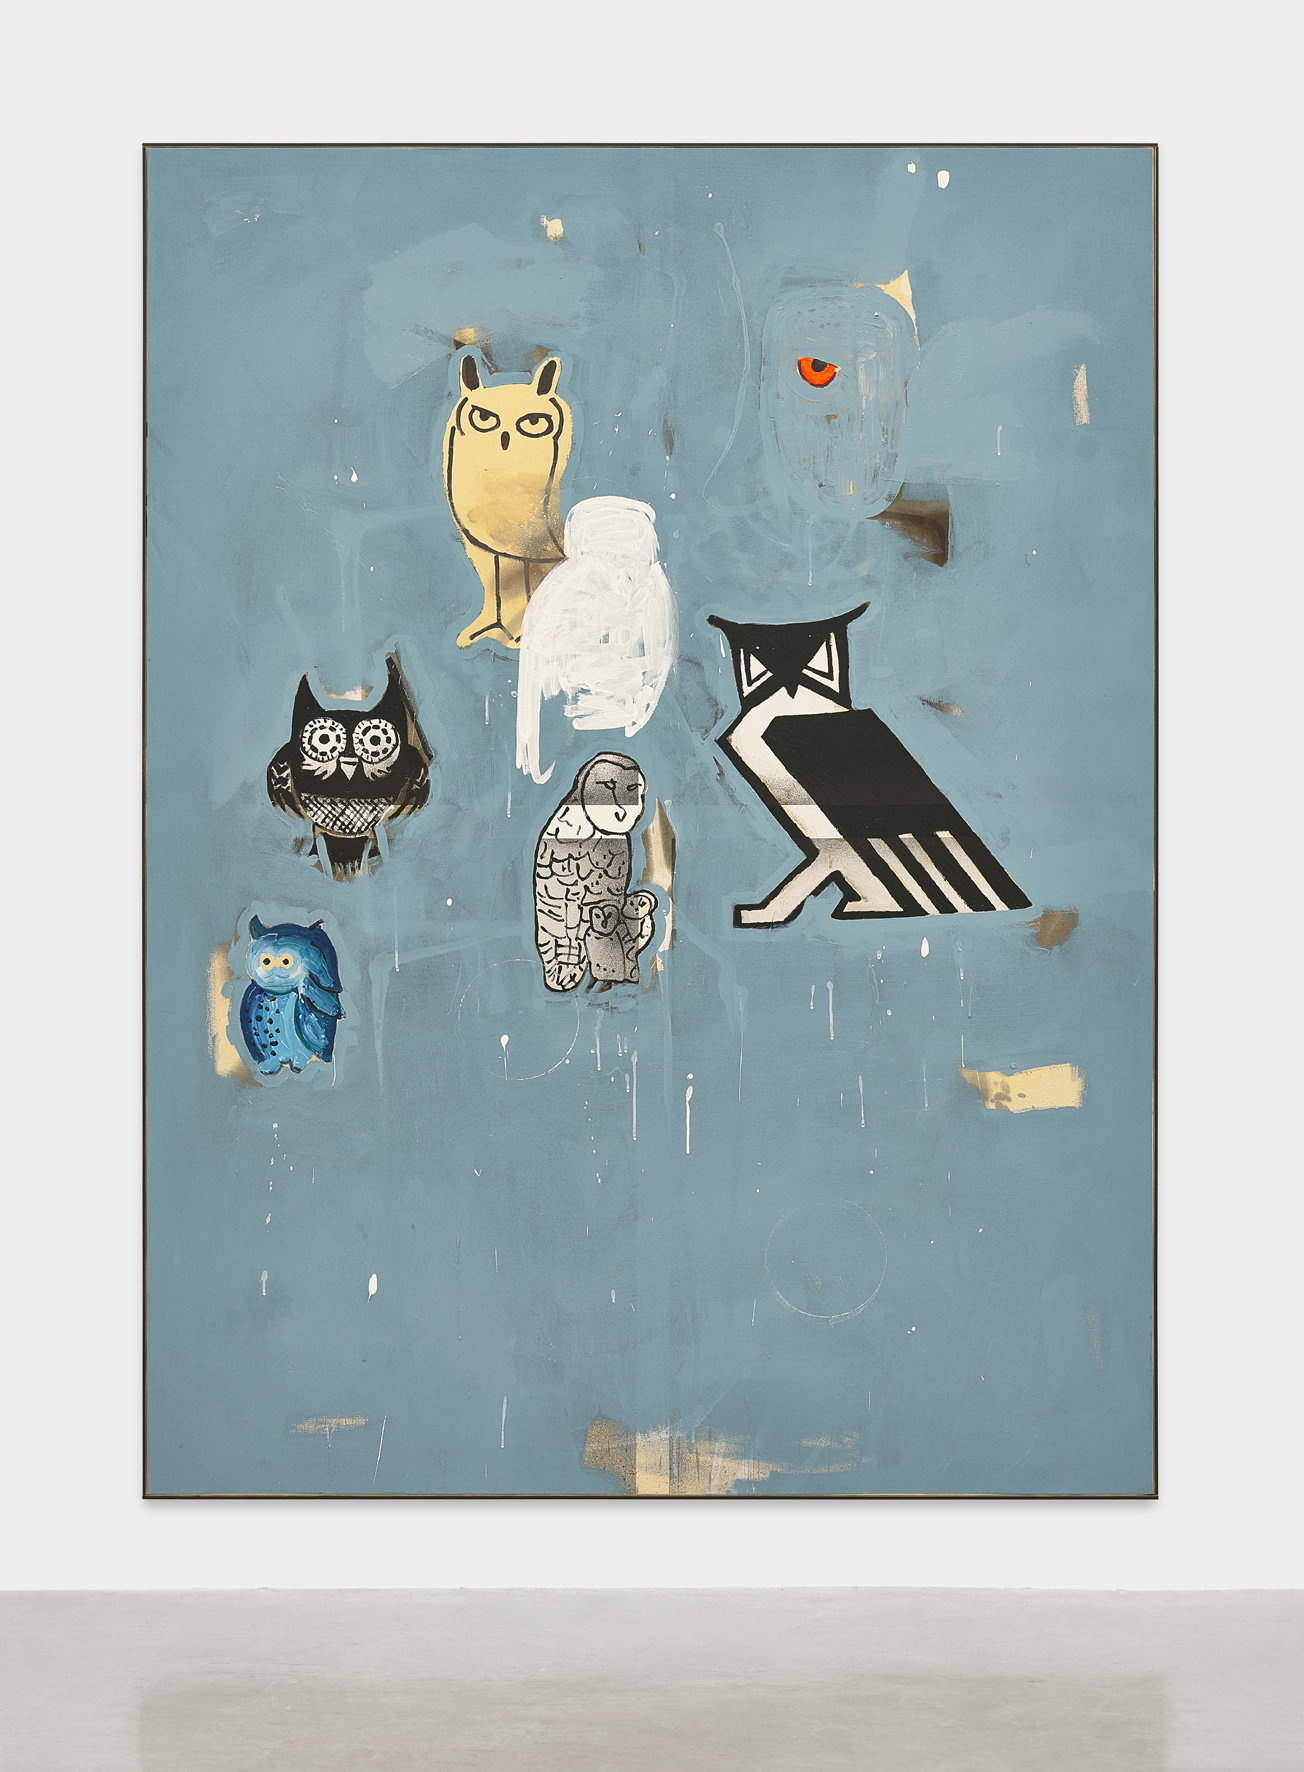 David Ostrowski, Students of Albert Oehlen (Political Paintings), 2009-2019, acrylic and lacquer on canvas, wood, 78.75h x 59w in.